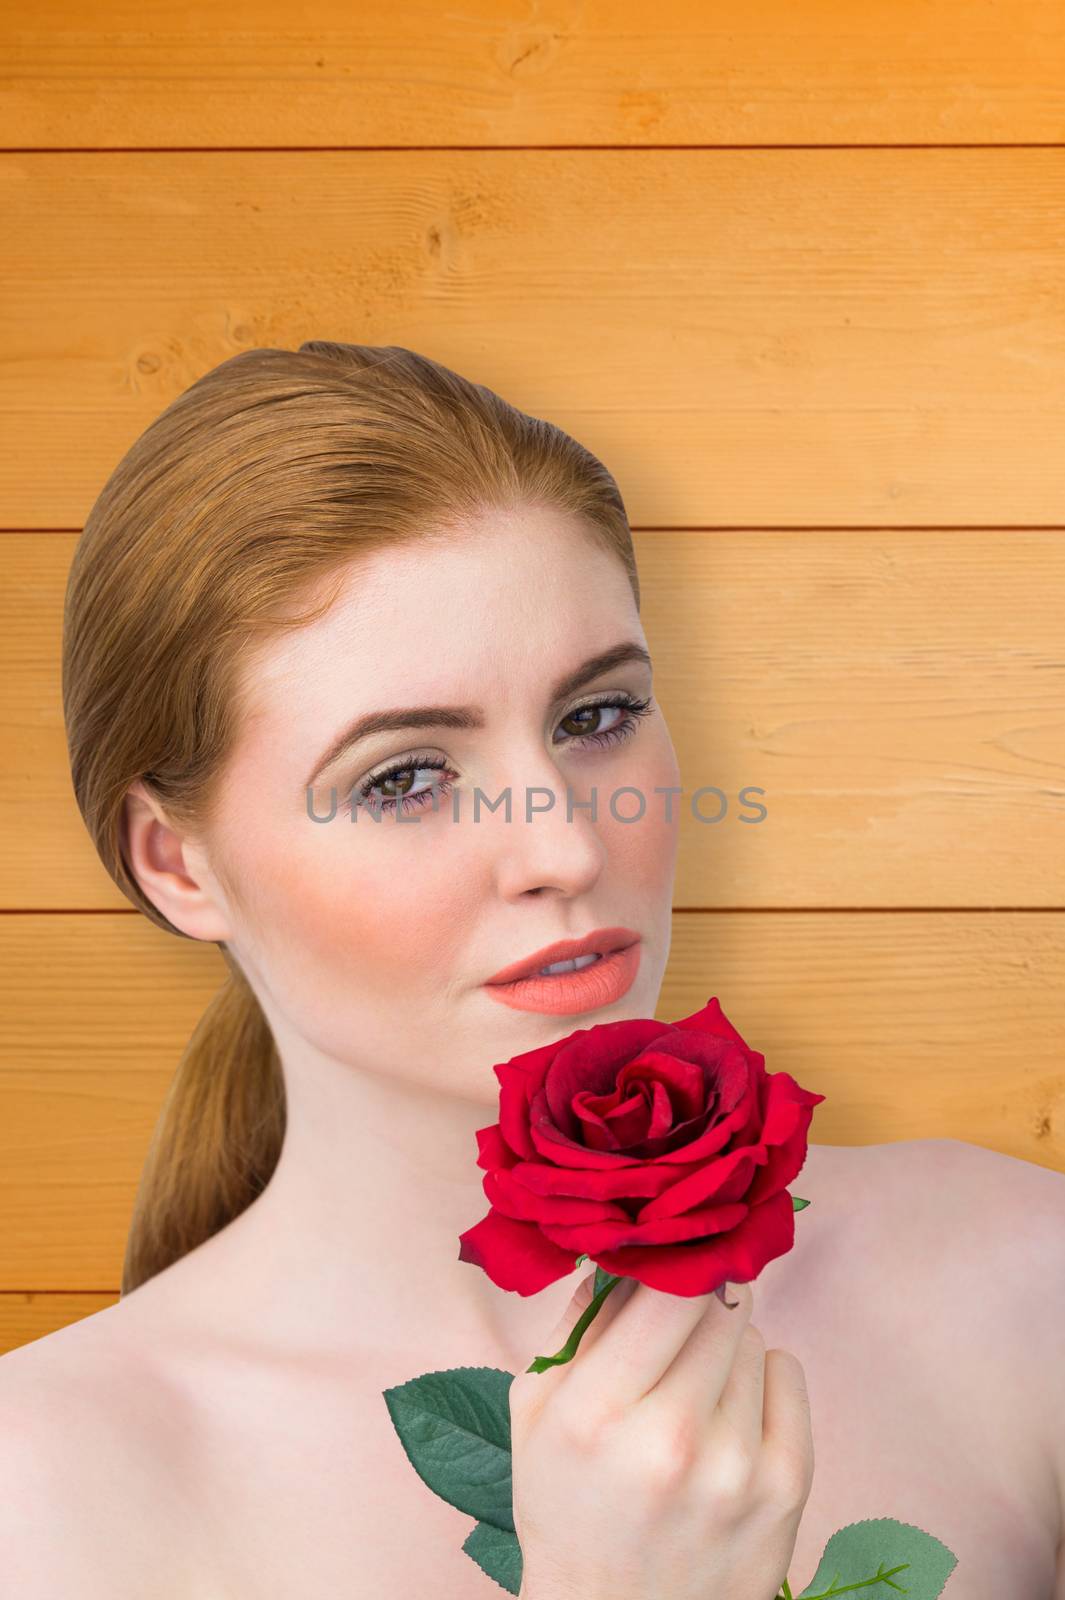 Beautiful redhead posing with red rose against wooden background